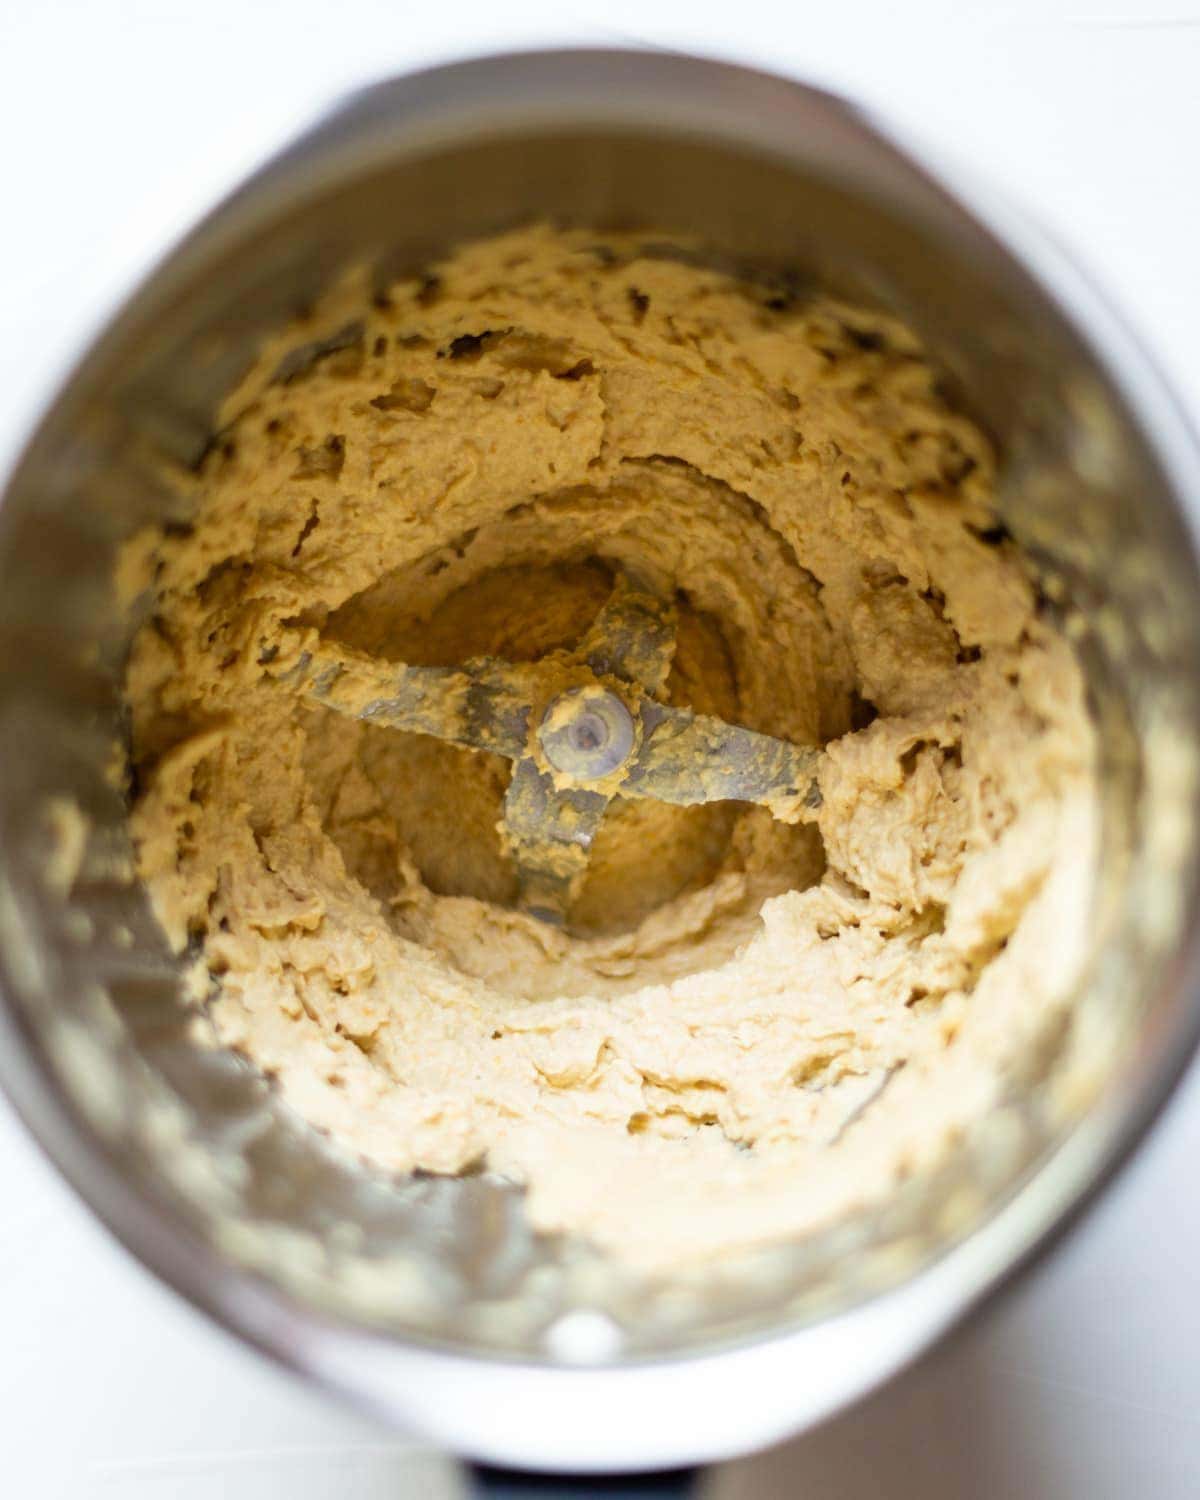 The Thermomix filled with freshly blended classic hummus.